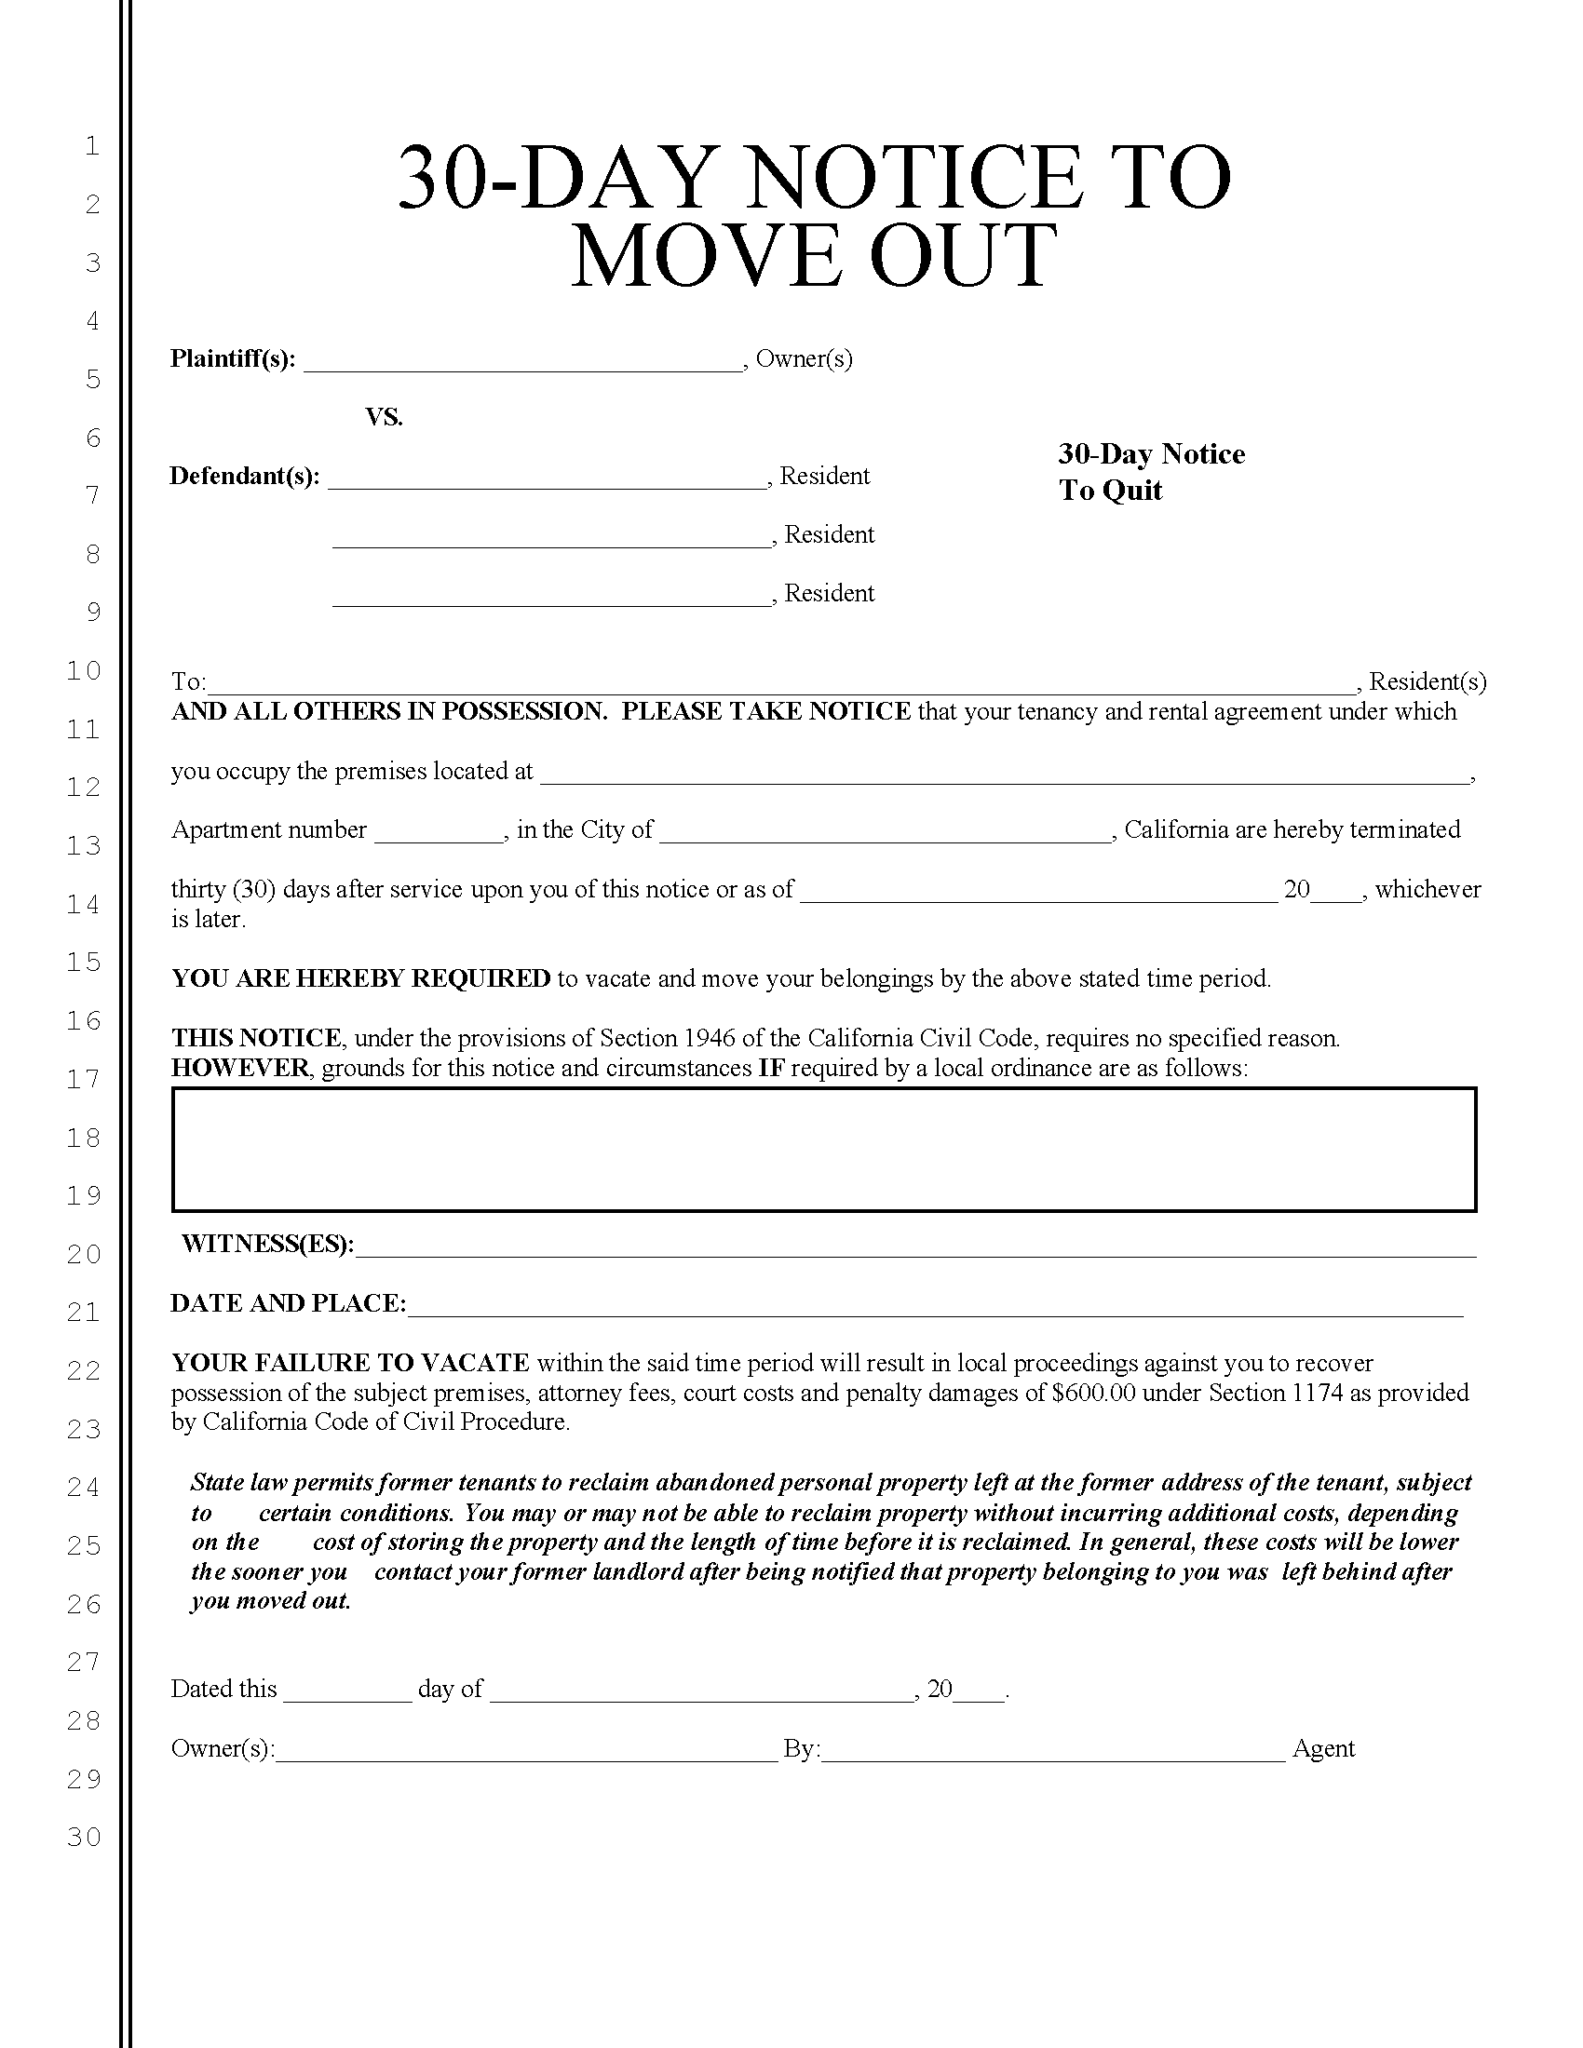 fillable-notice-30-form-fill-out-and-sign-printable-pdf-template